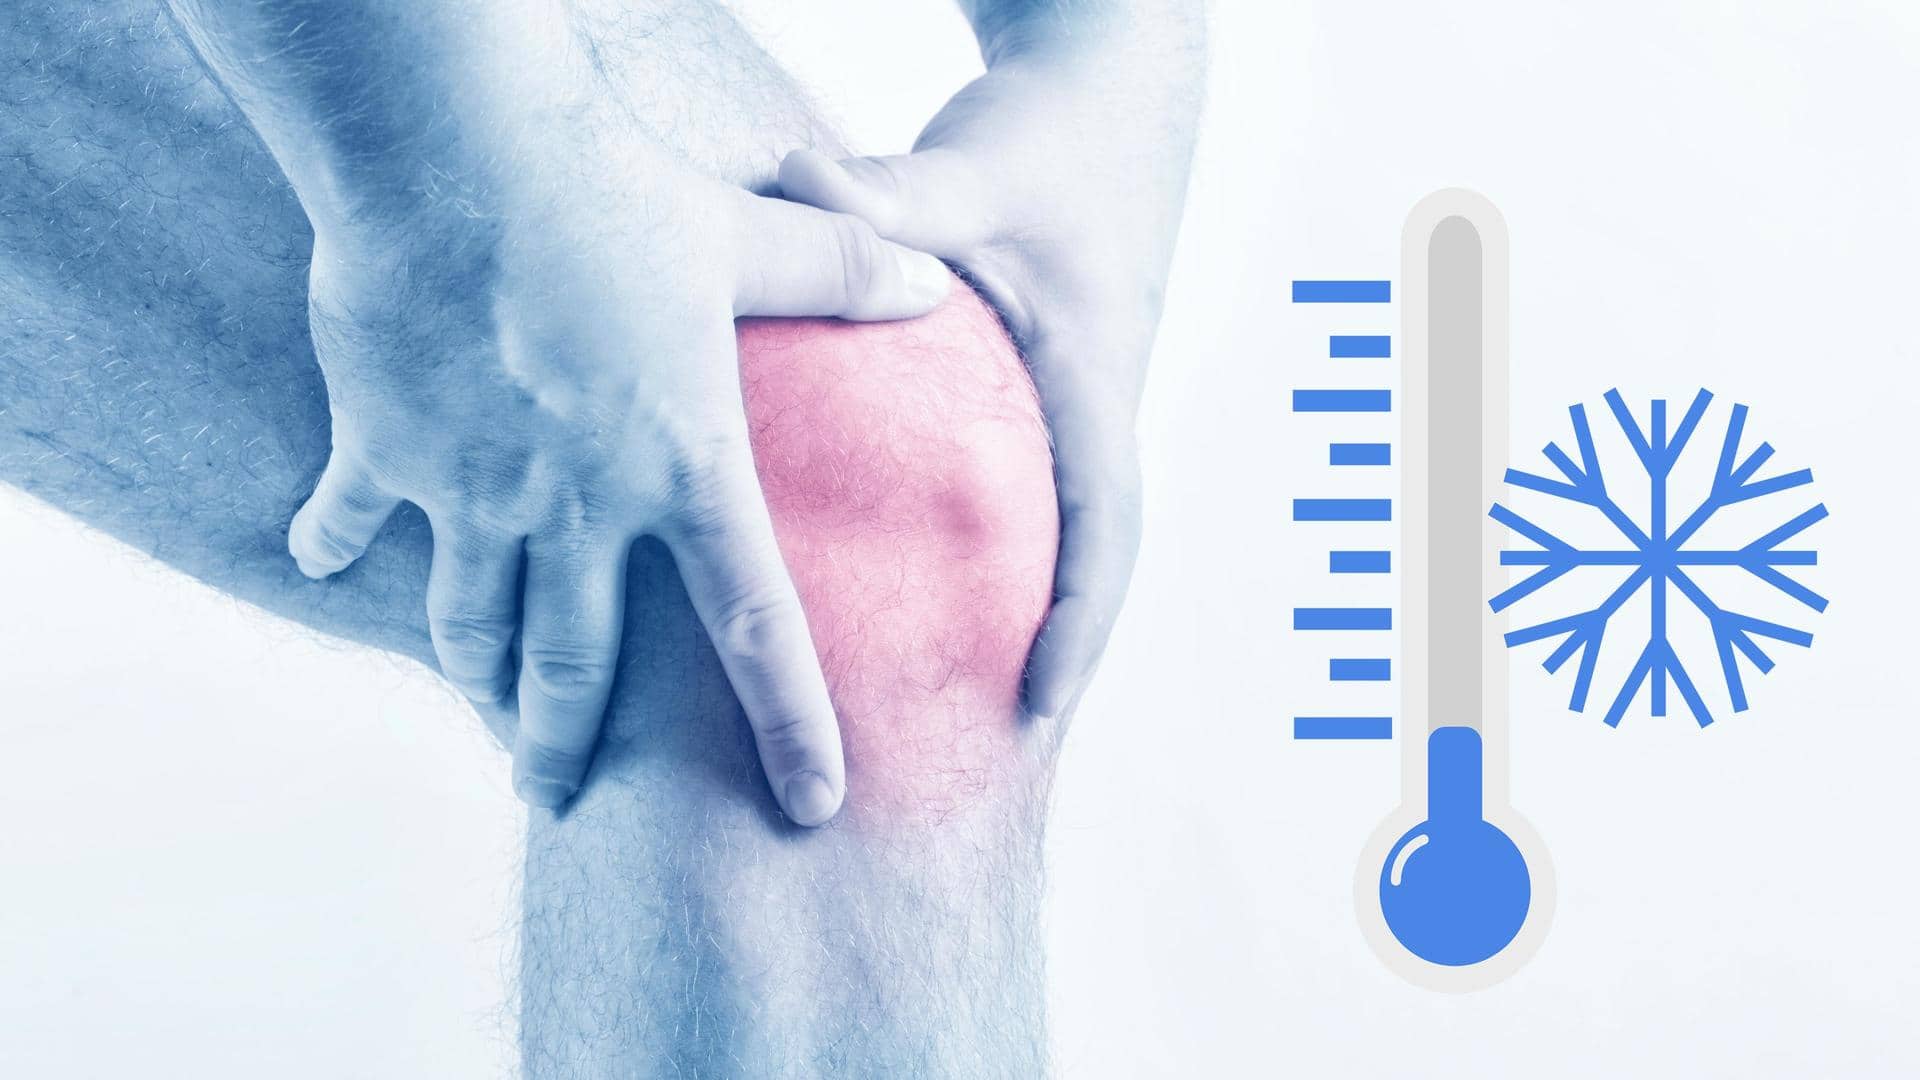 Tips to beat muscle spasms and joint pains in winter